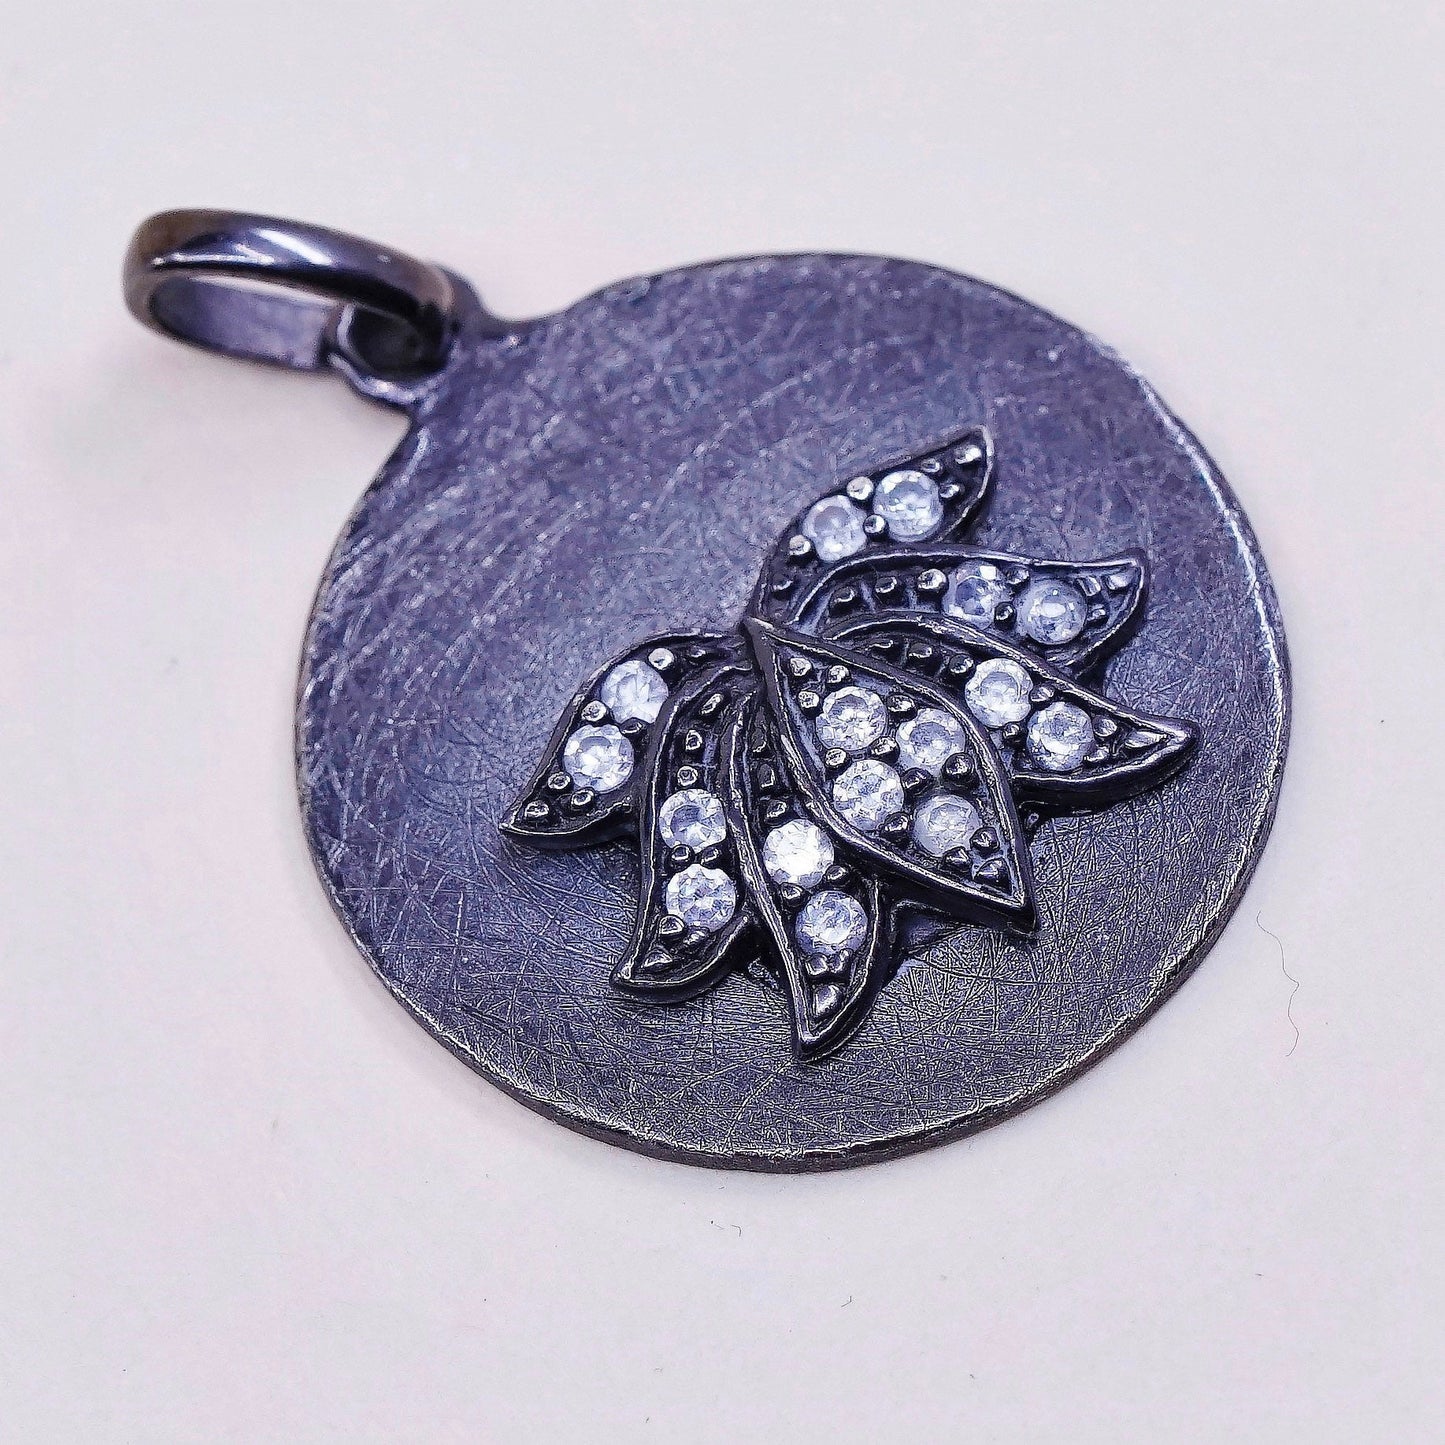 Vintage sterling silver handmade pendant, 925 tag charm with flower Cz